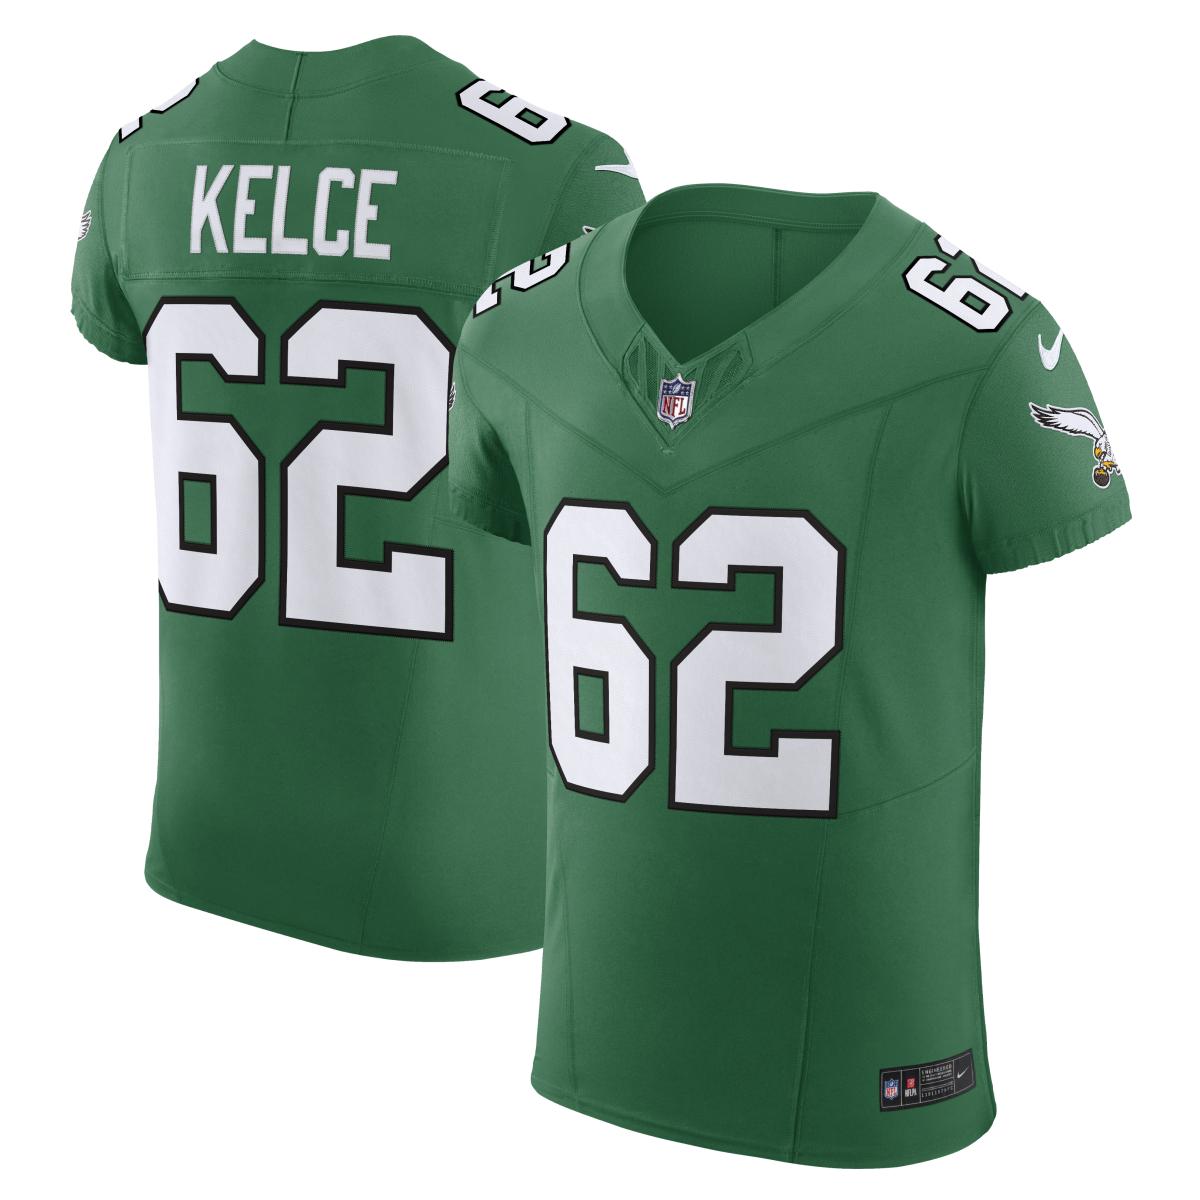 Philadelphia Eagles throwback jersey, Get your Eagles Kelly Green